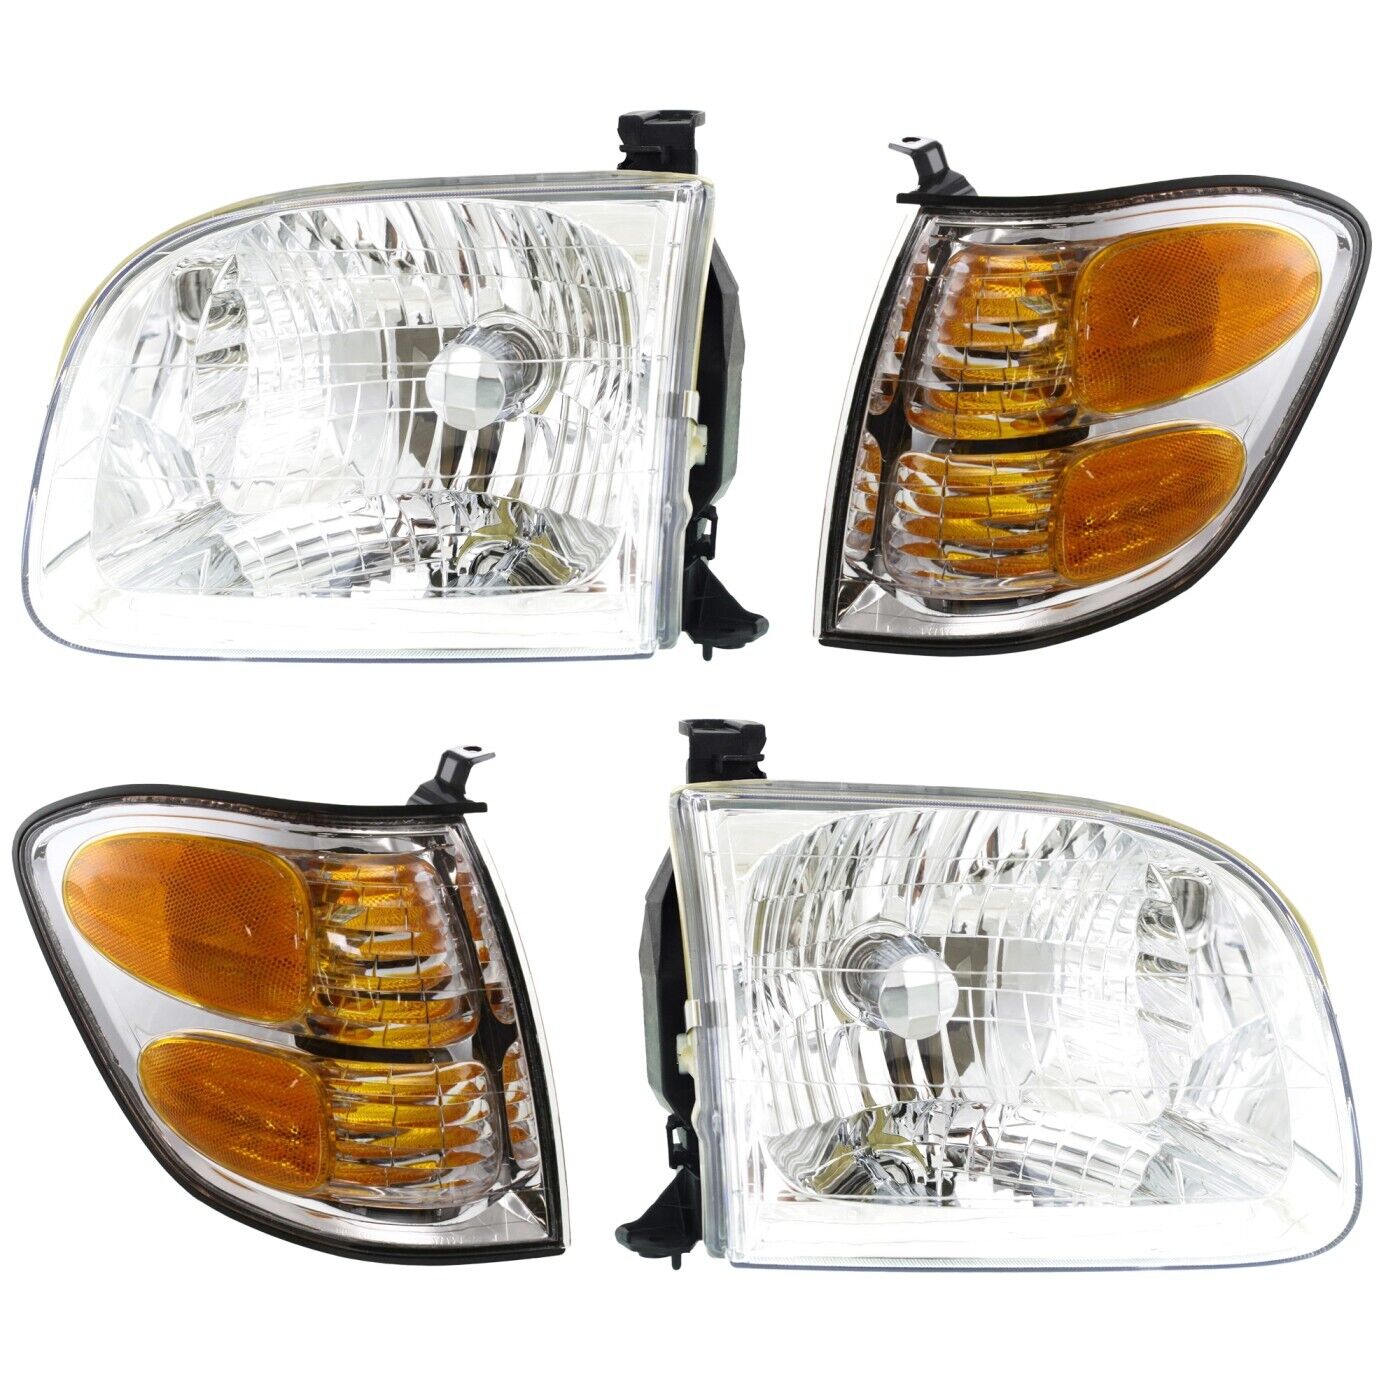 Headlight Kit For 2001-2004 Toyota Sequoia Left/Right Side Built Up To 08/2004